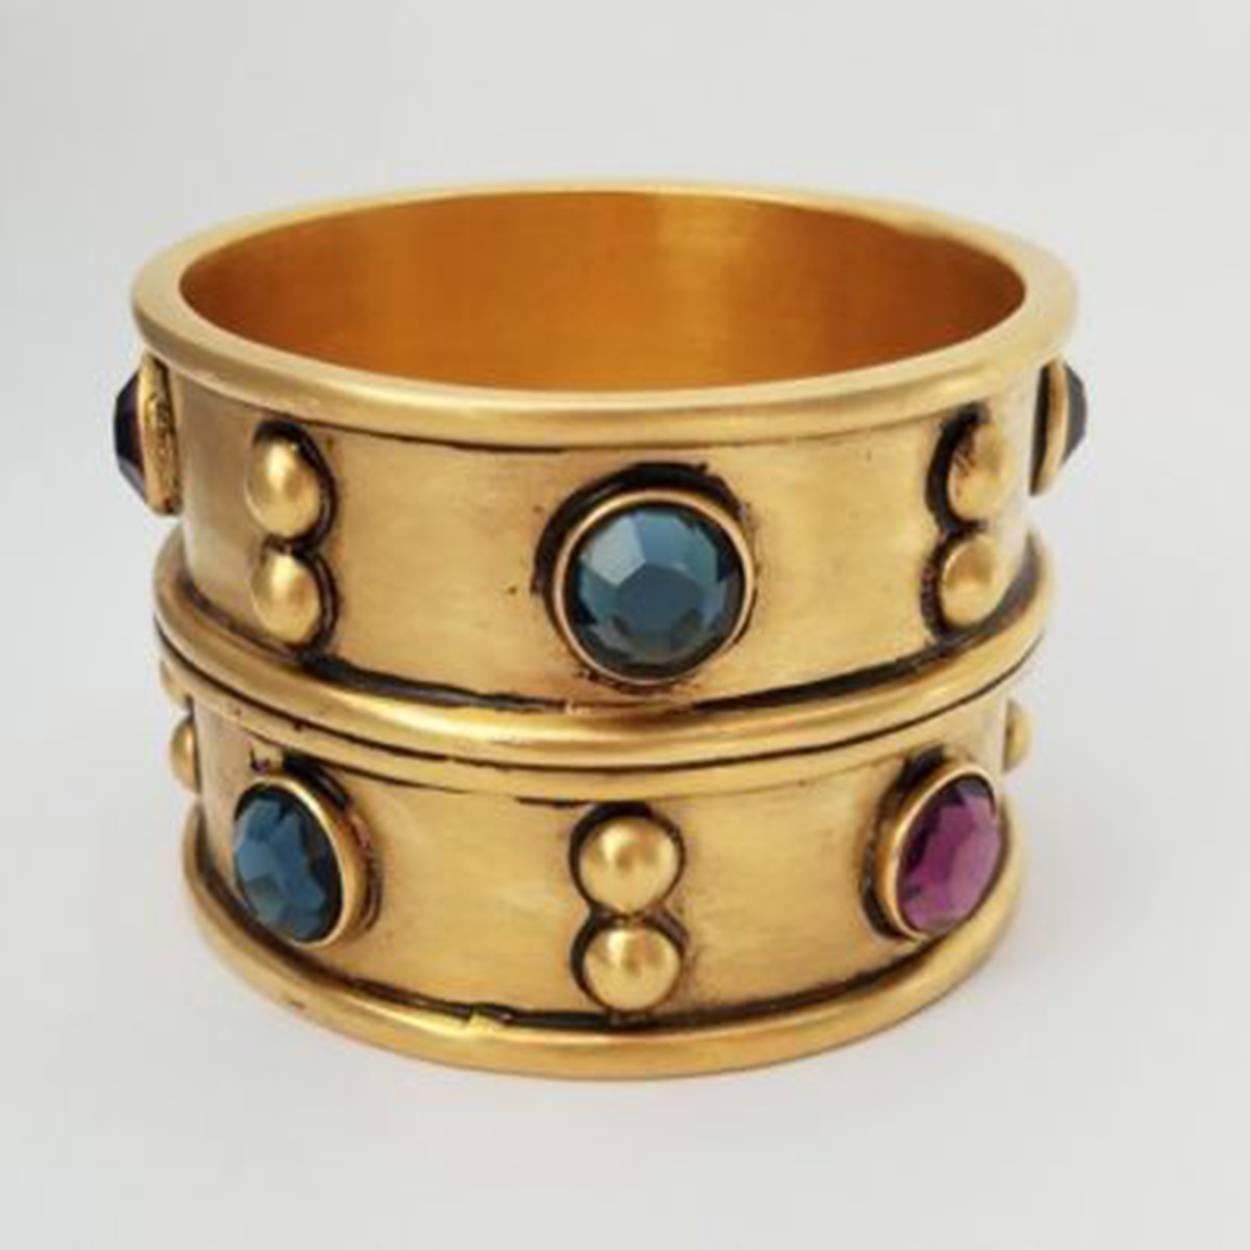 Sensational wide bangle cuff Jeweled bracelet set with purple and blue faceted crystals Signed: Ben-Amun. Approx measurements: 1.88